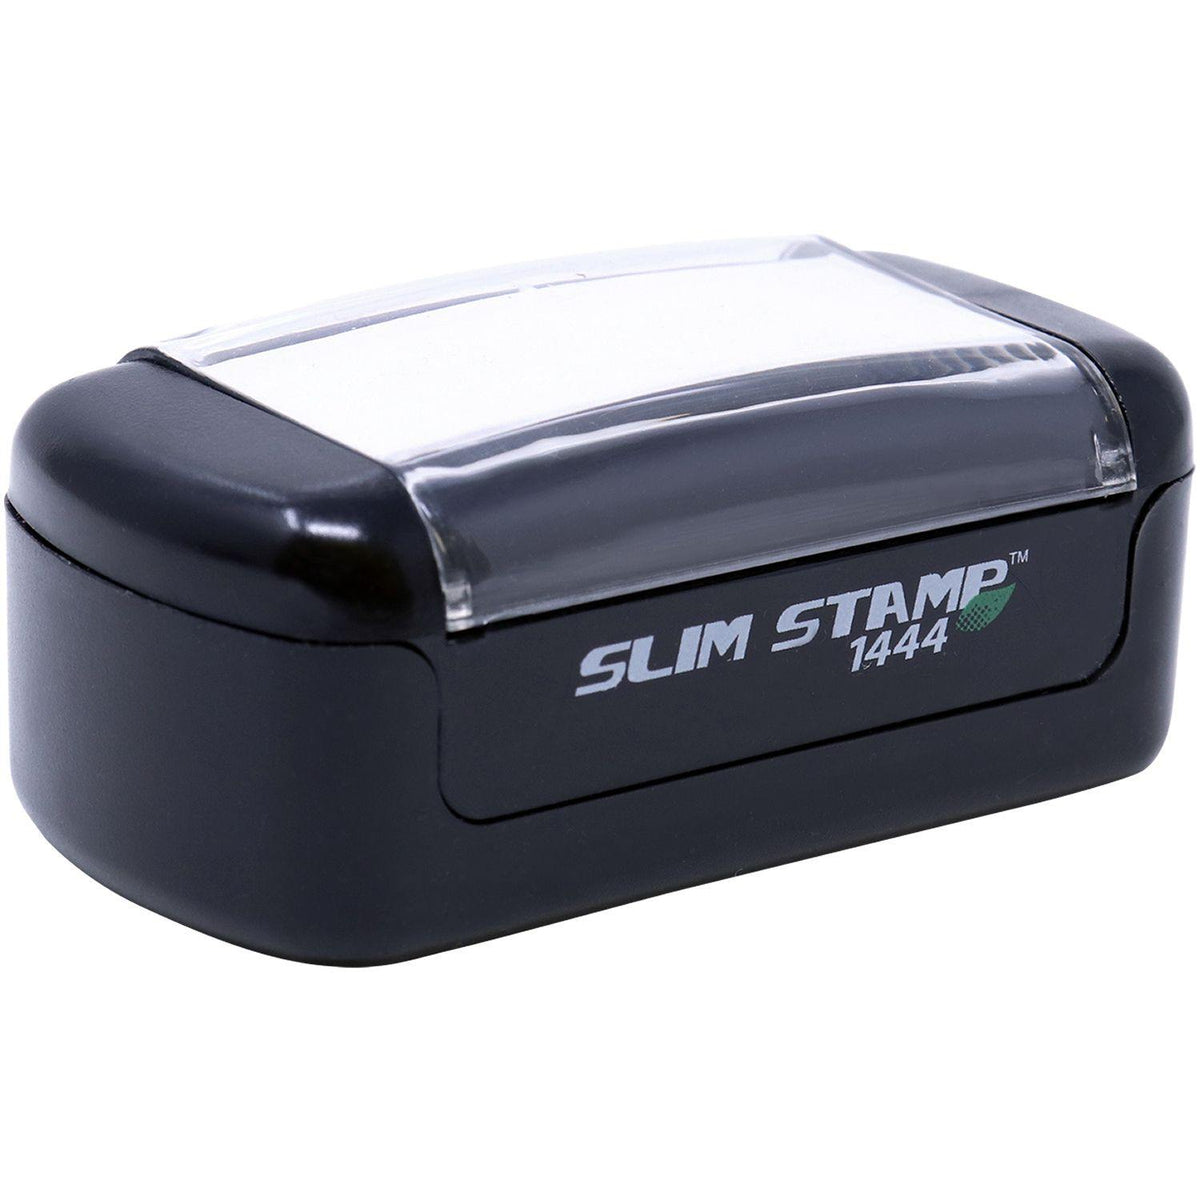 Alt View of Slim Pre Inked Credit Cards Stamp Mount Angle